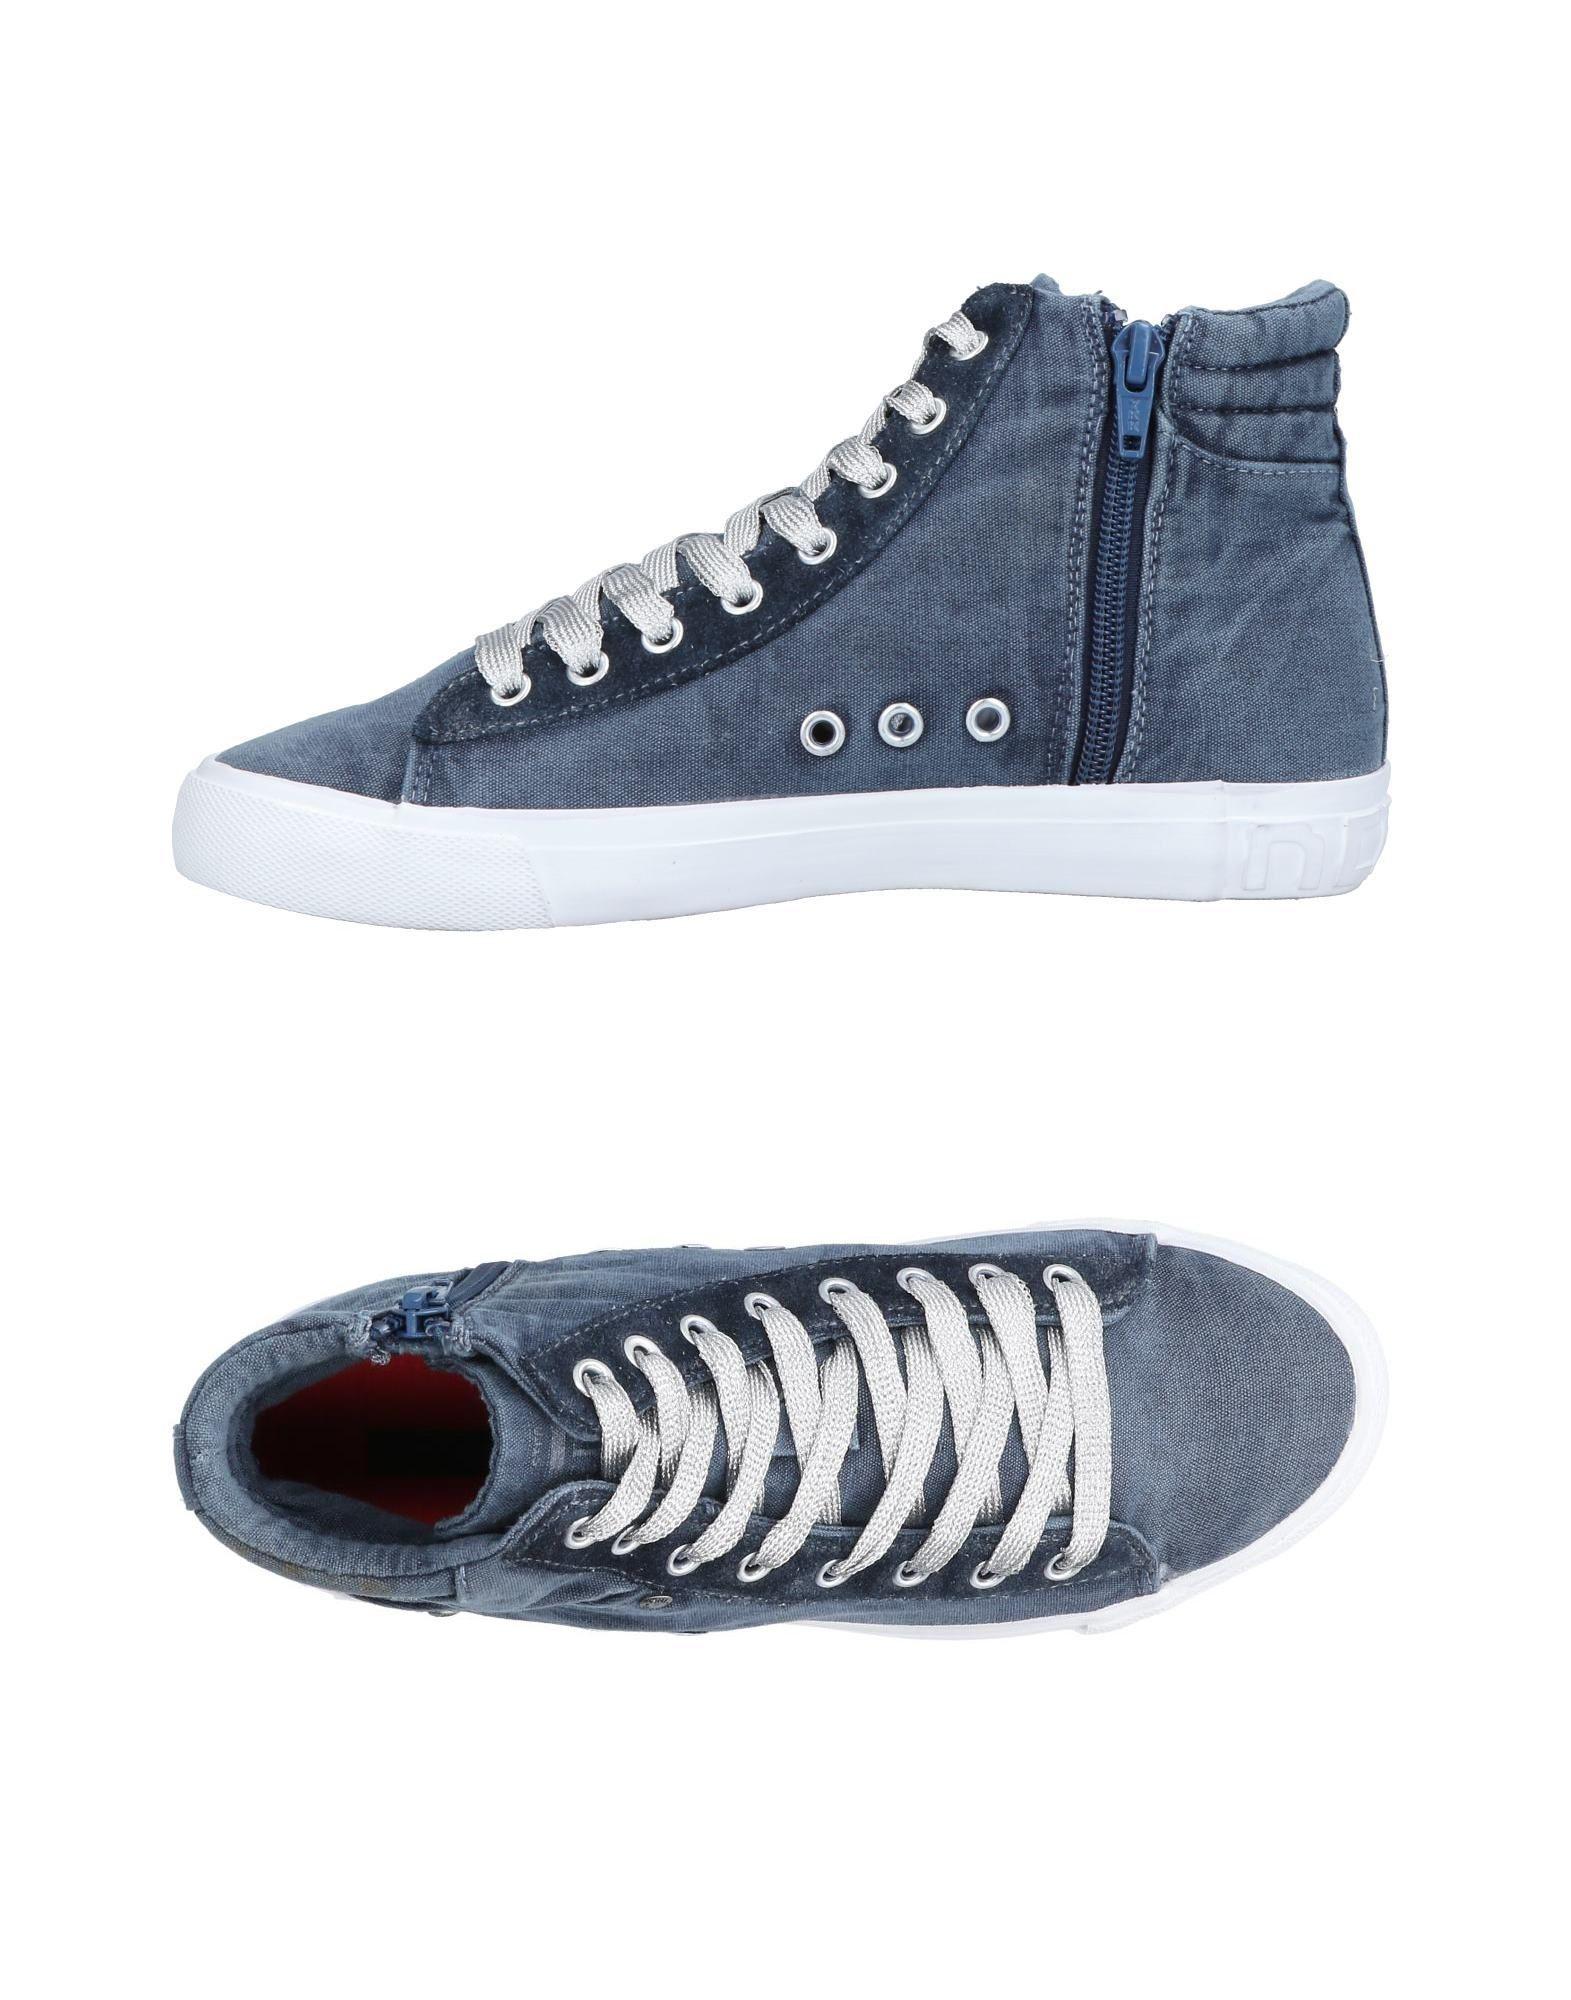 Replay Synthetic High-tops & Sneakers in Dark Blue (Blue) - Lyst